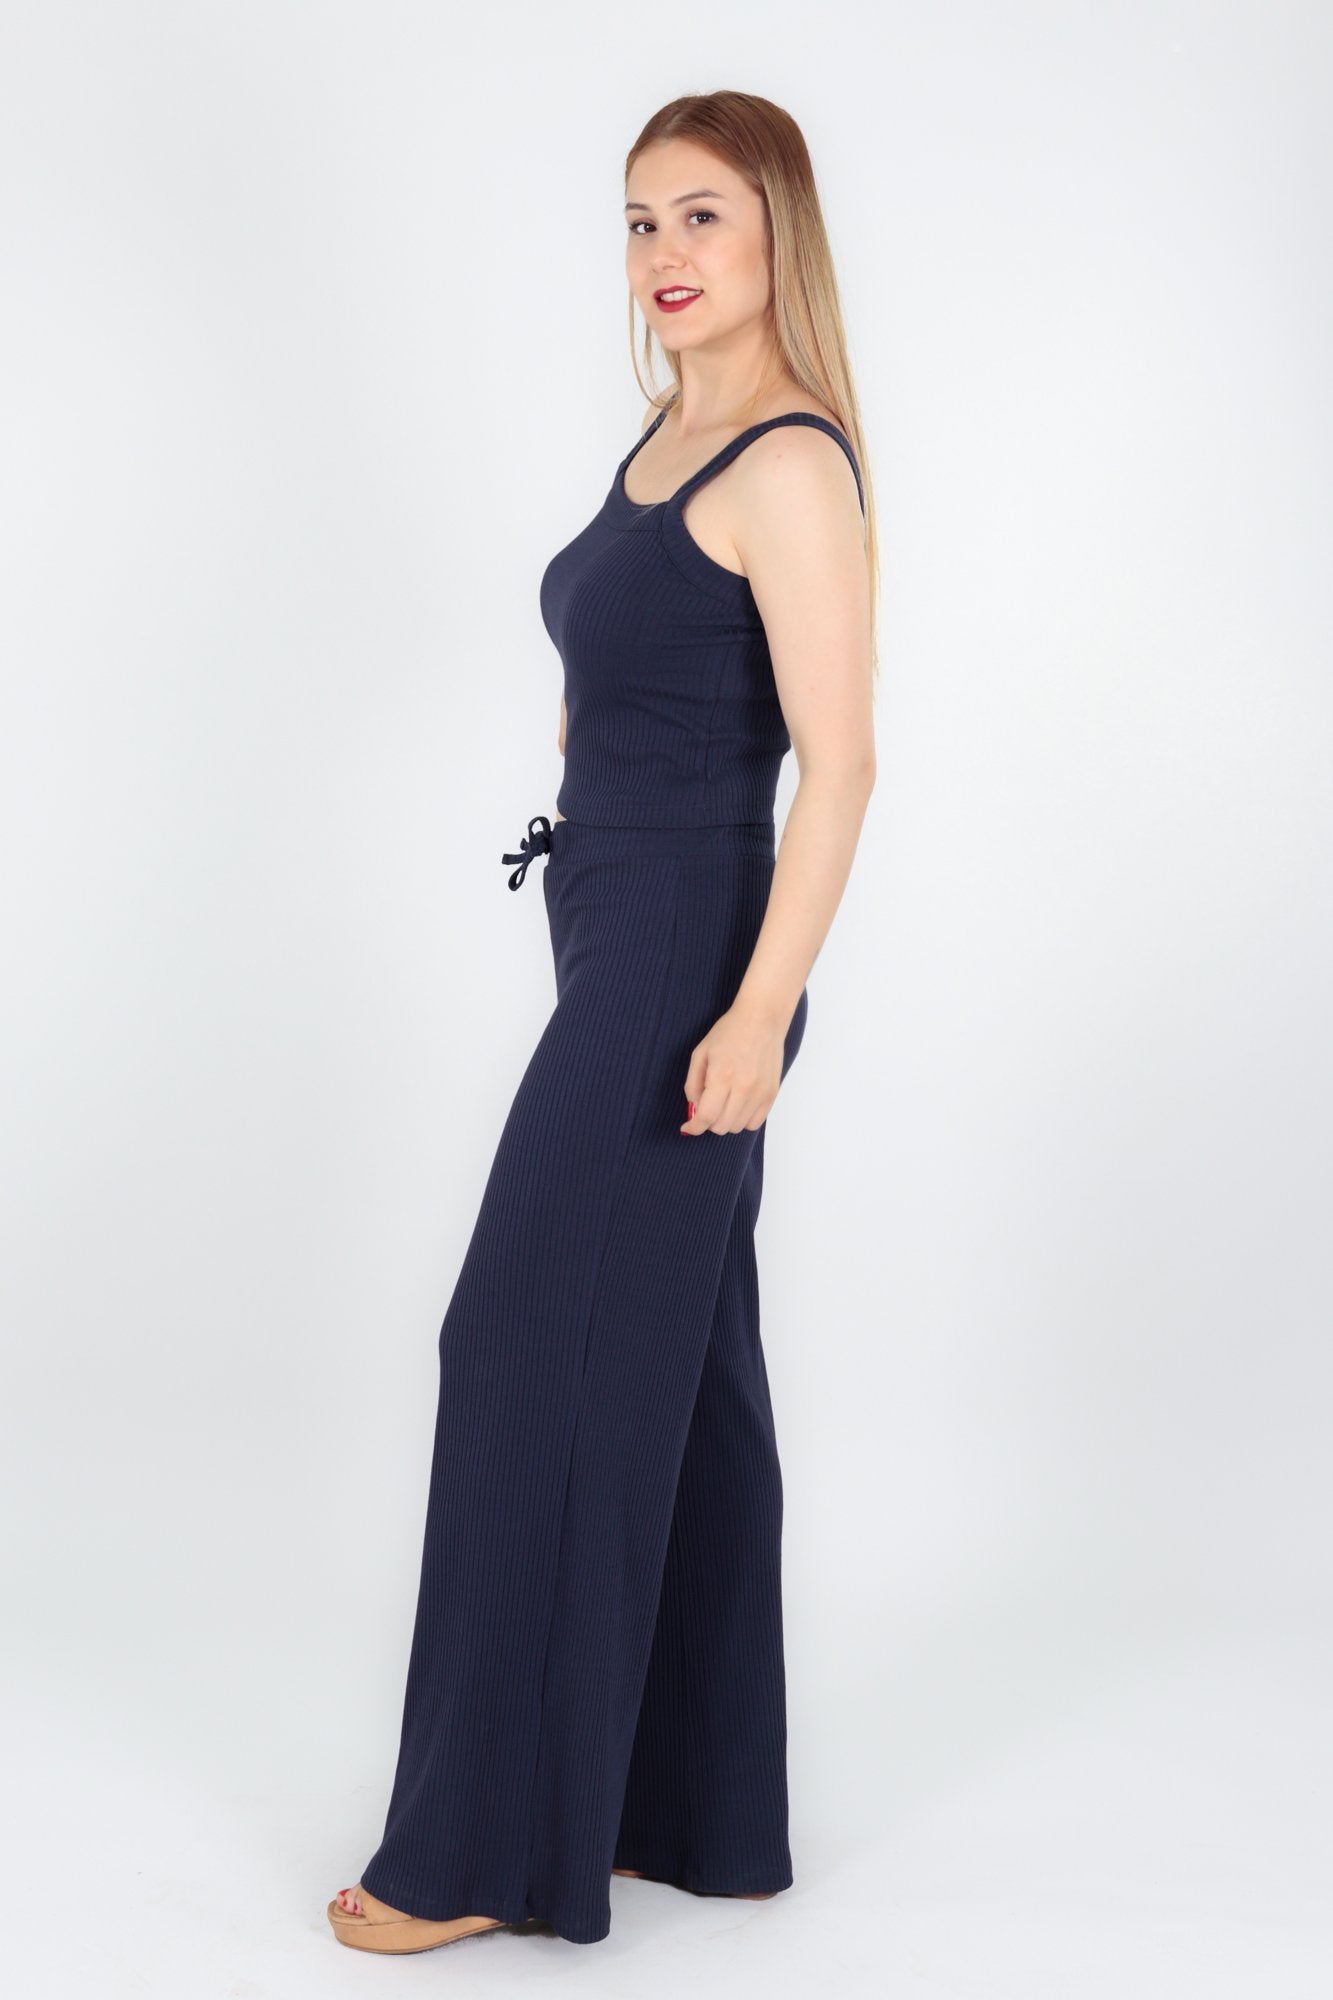 chassca navy singlet top with wide leg pant - Breakmood